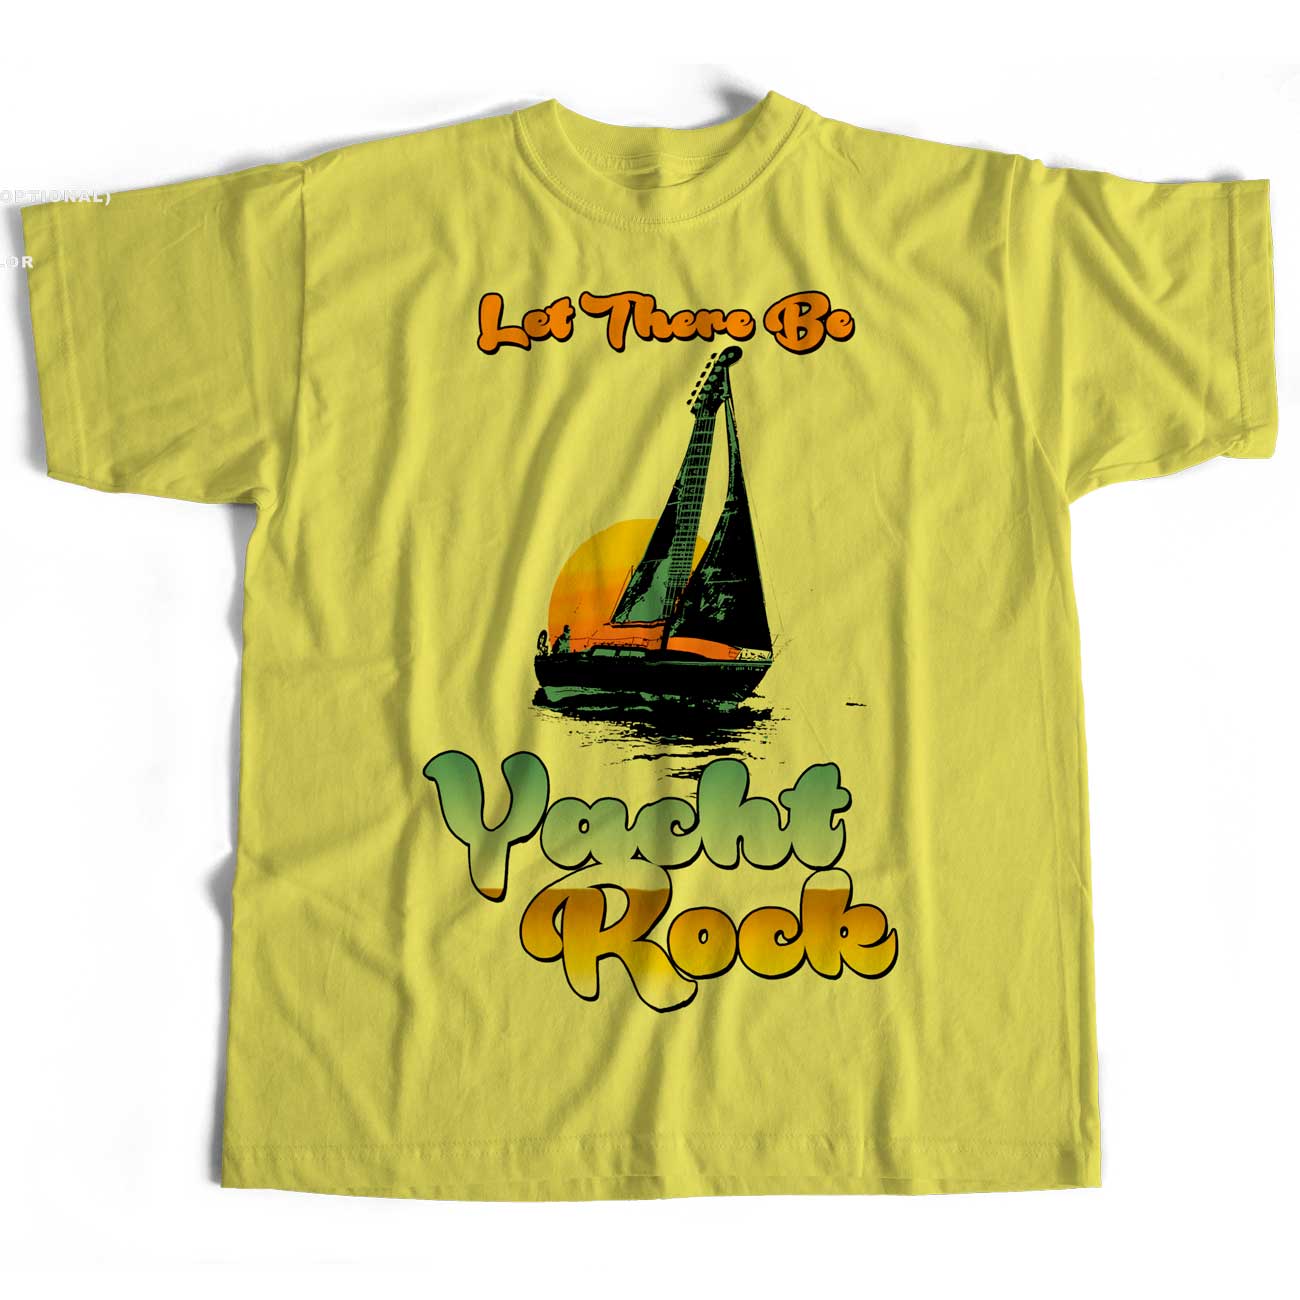 Old Skool Hooligans Let There Be Yacht Rock T Shirt - For West Coast AOR Afficionados